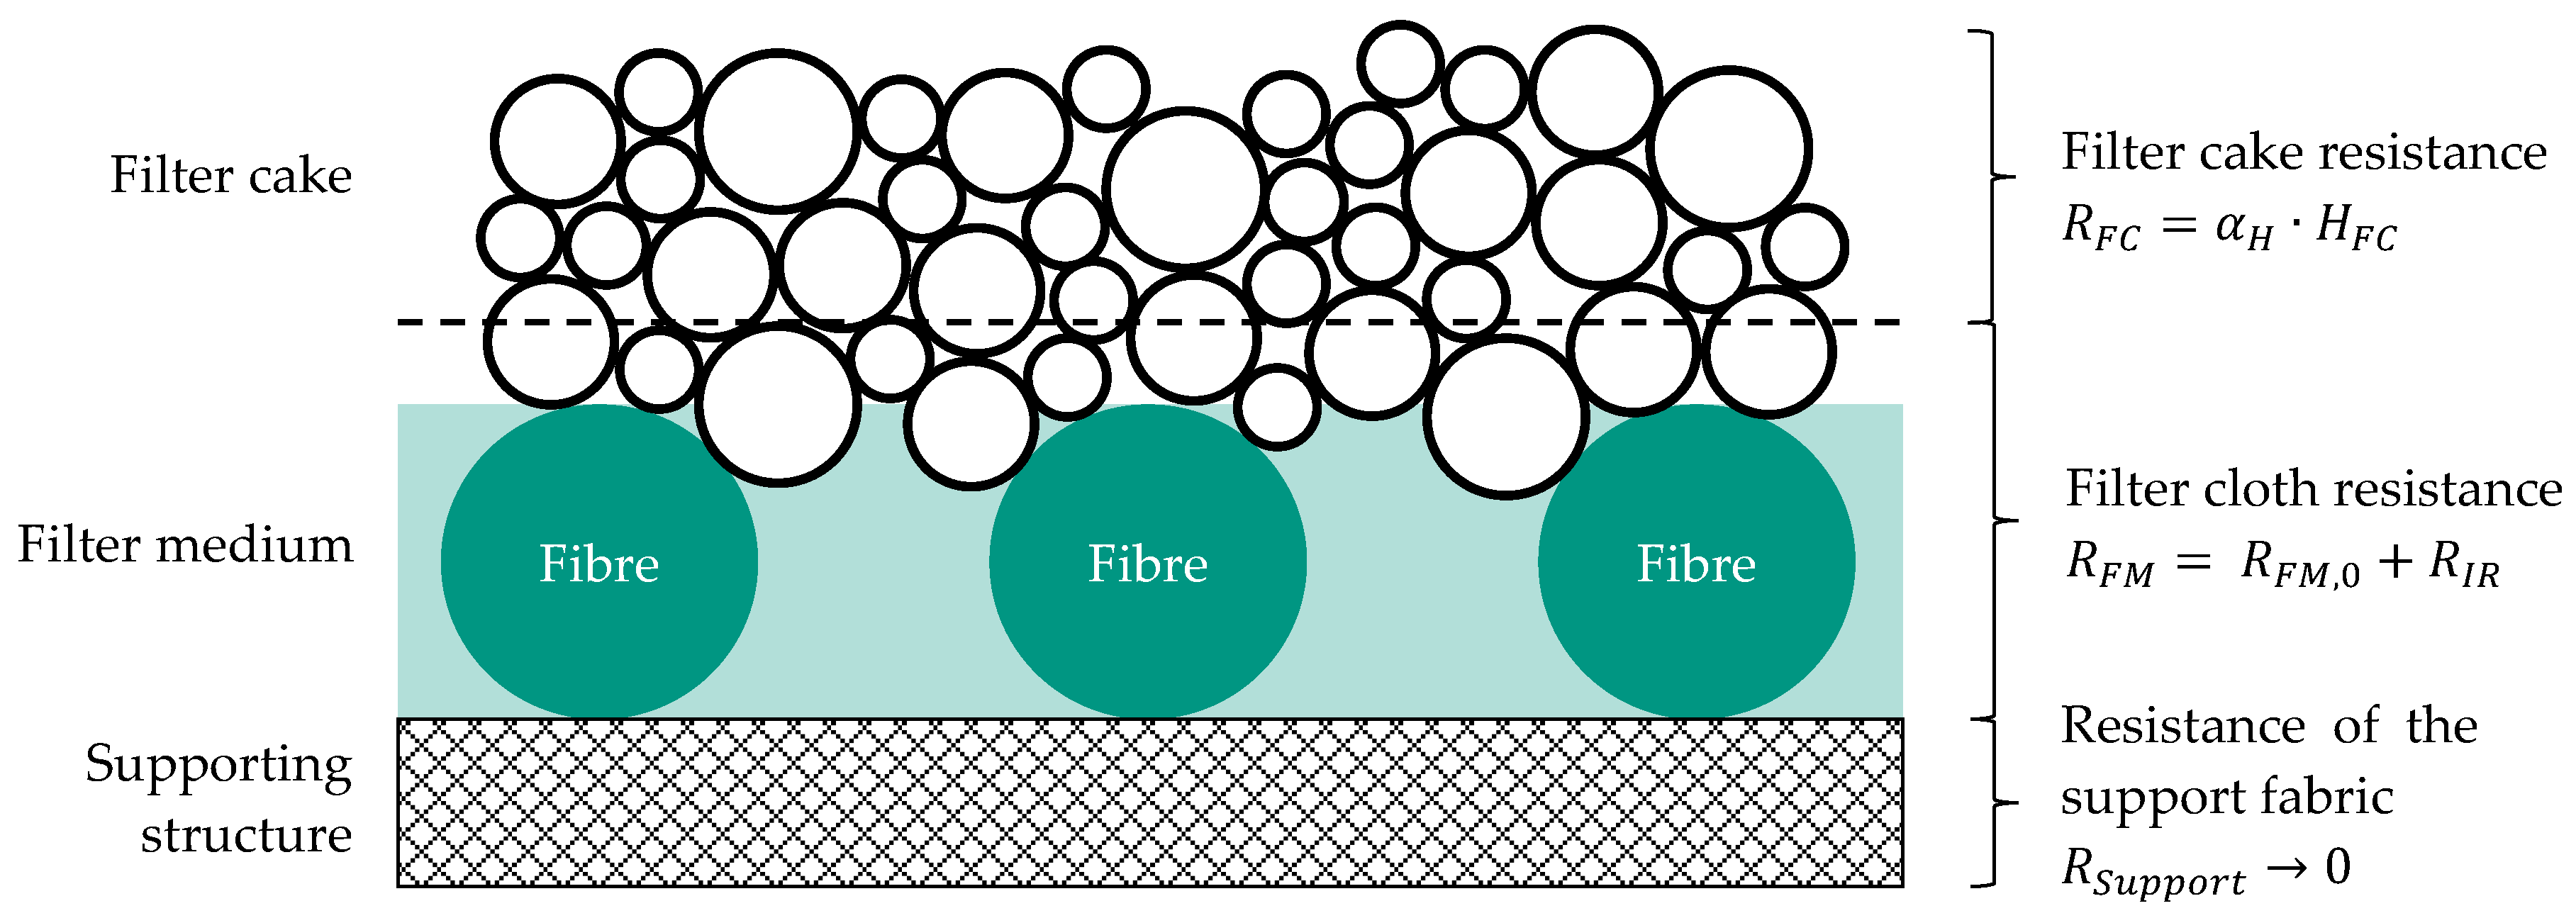 Measuring Microns  Importance in FiltrationFrantz Filters